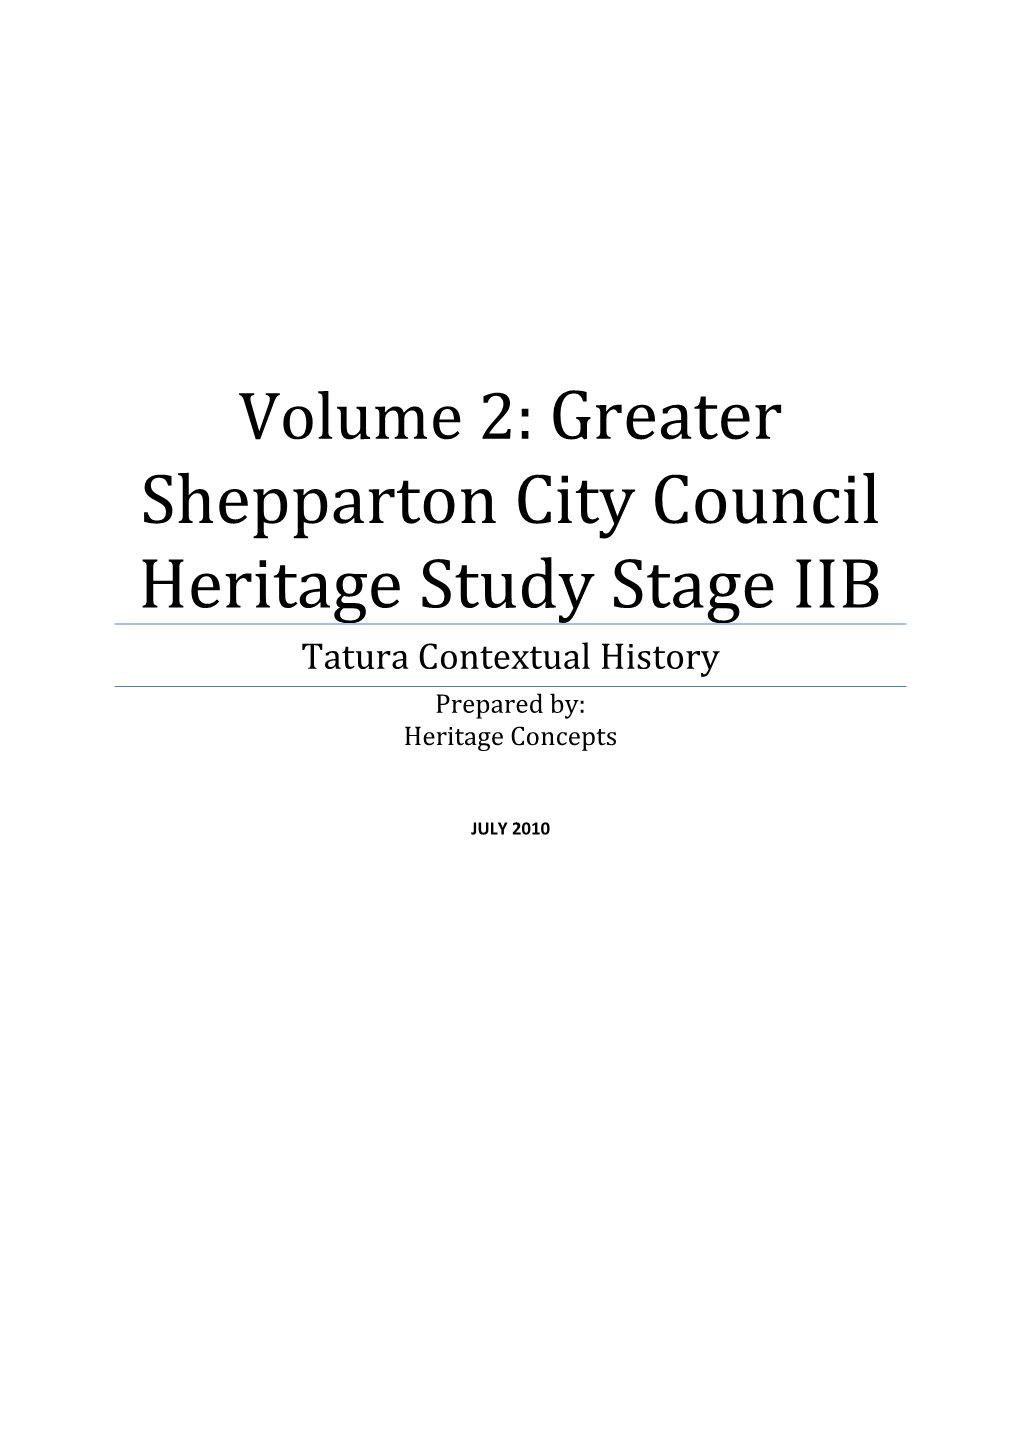 Shepparton City Council Heritage Study Stage IIB Tatura Contextual History Prepared By: Heritage Concepts